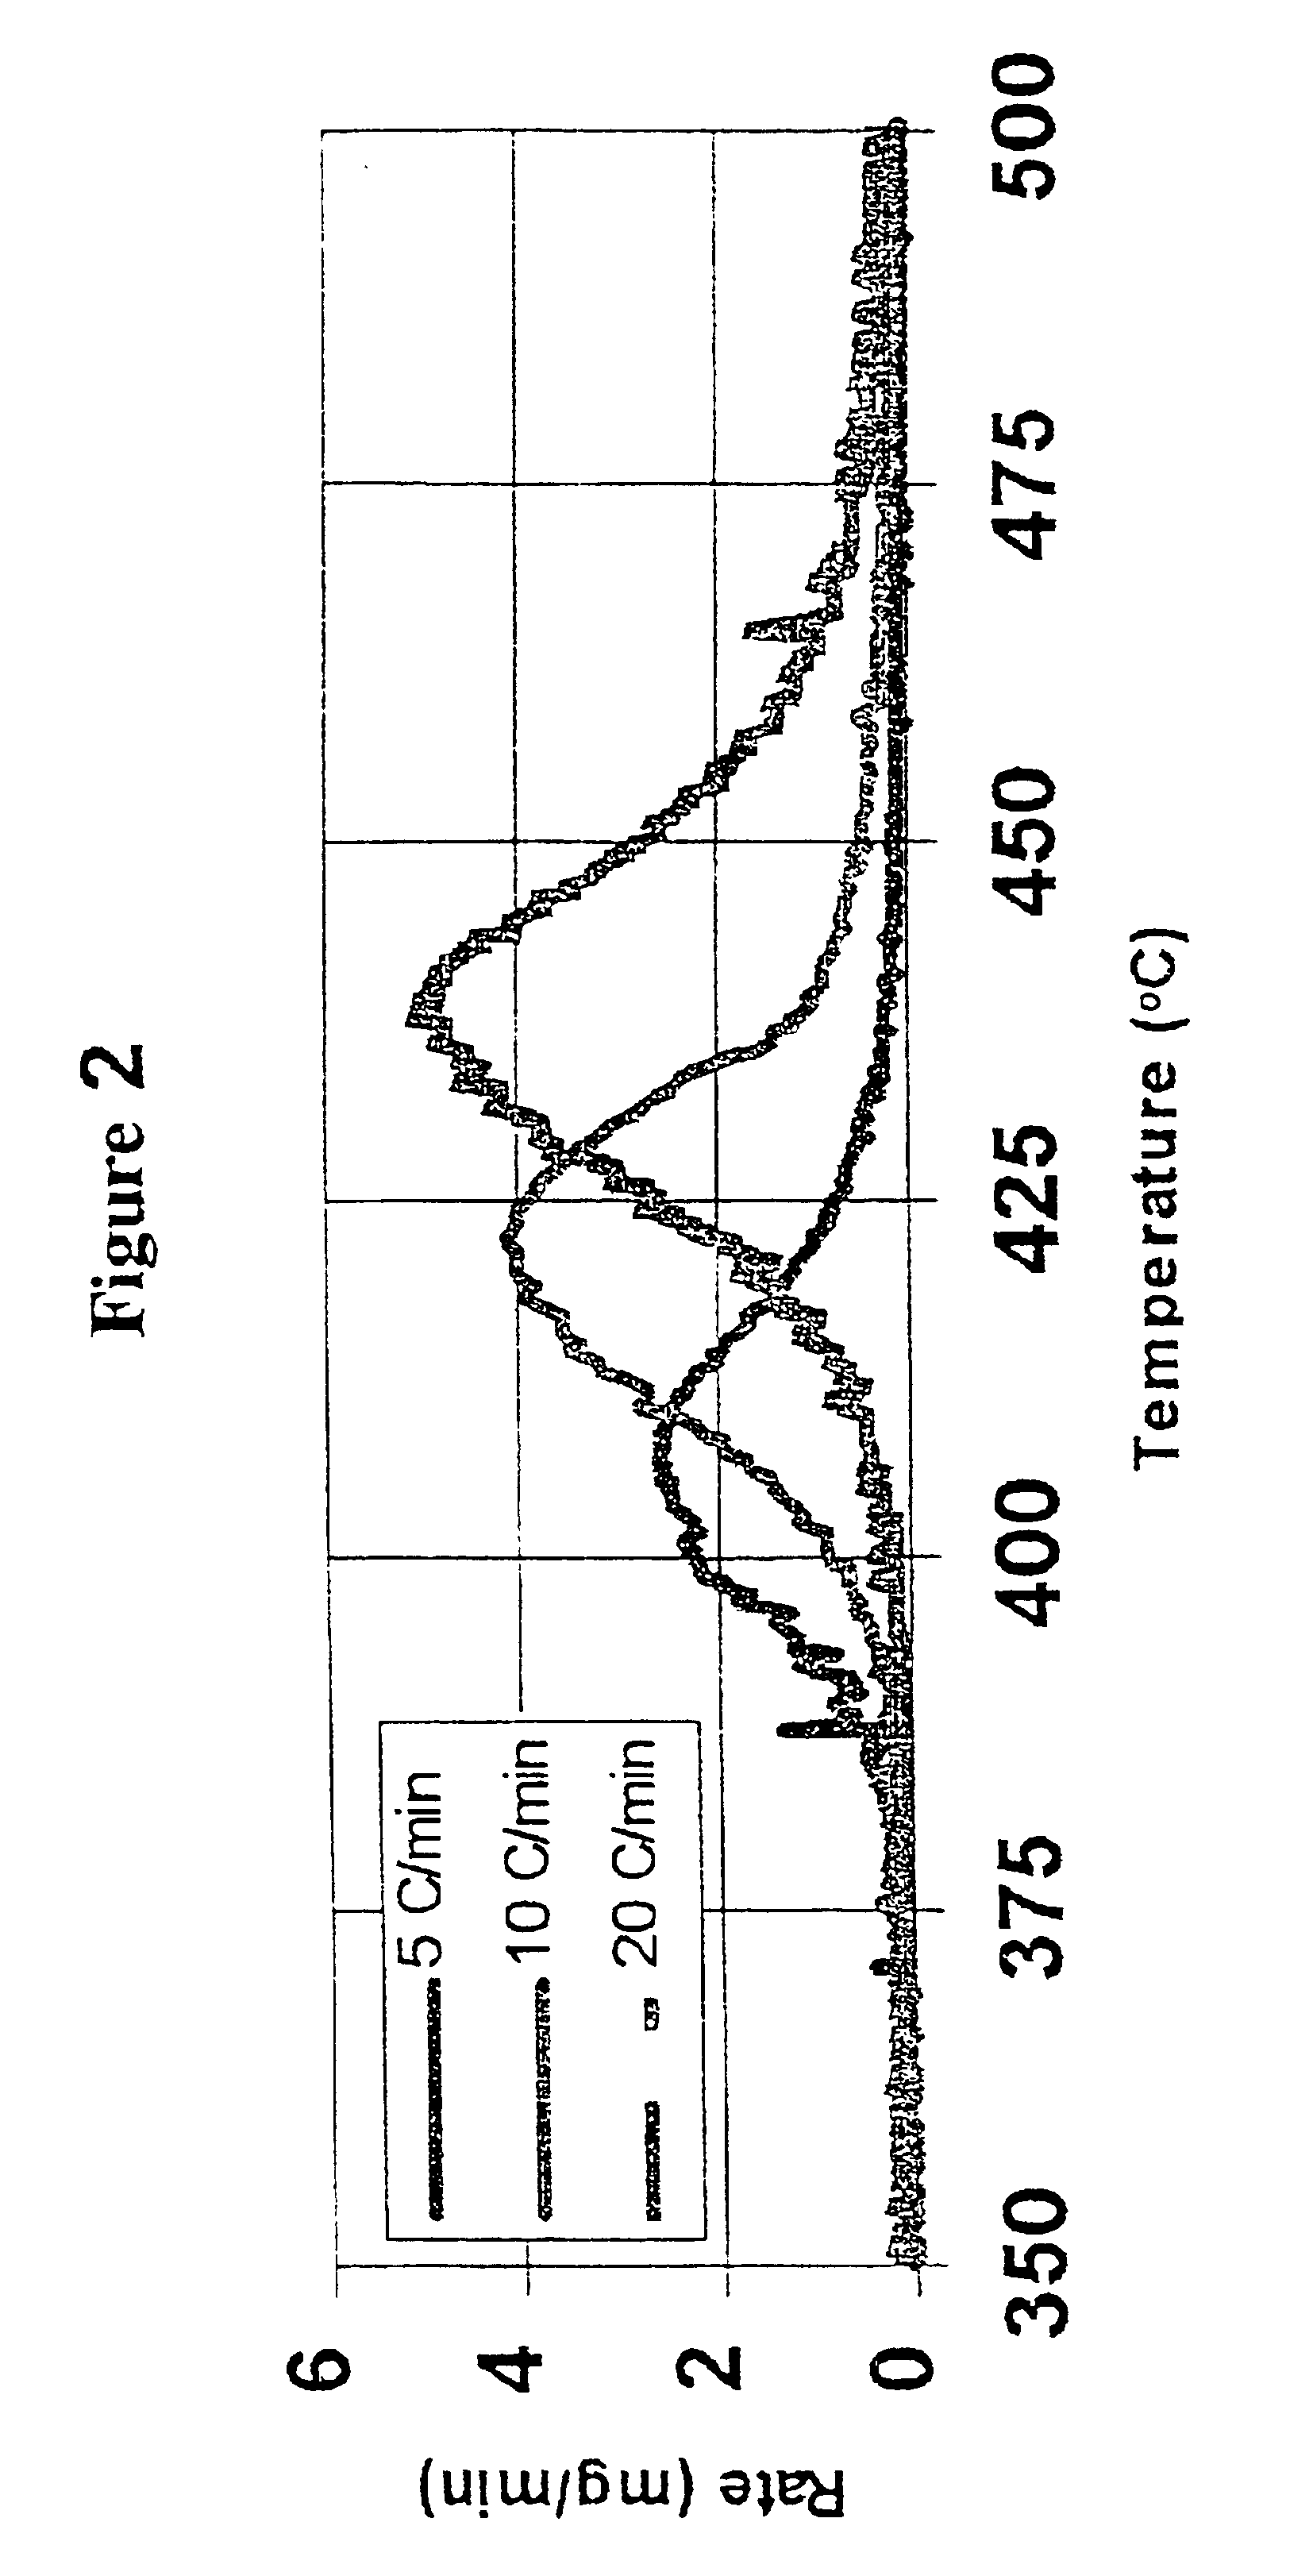 Method for isolating polyphenylene ether polymer resins from solution